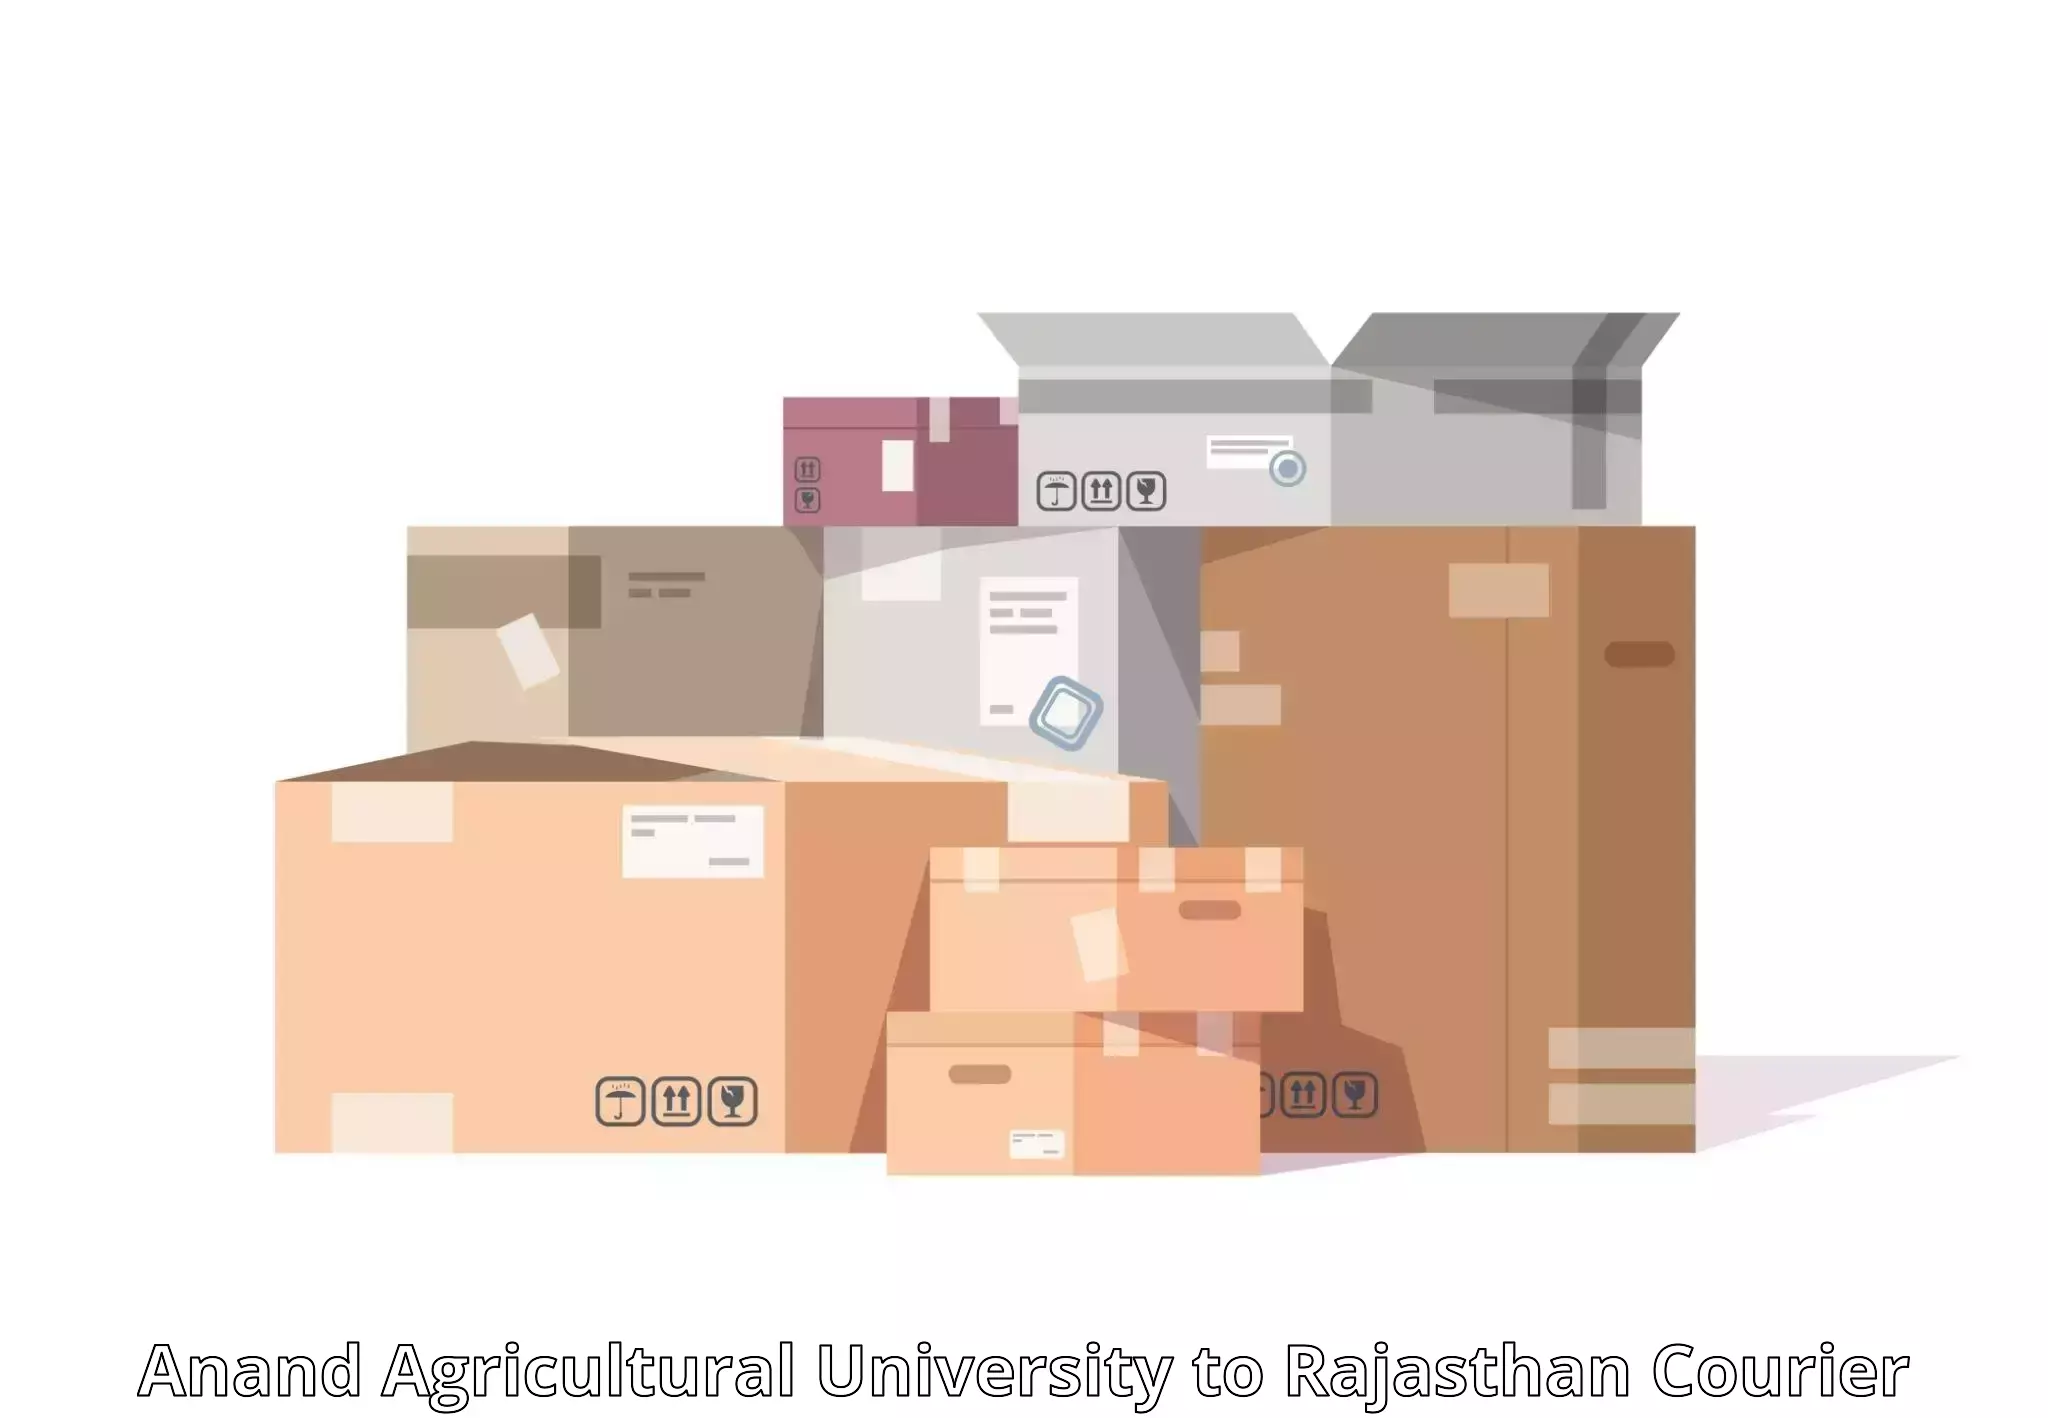 Small parcel delivery Anand Agricultural University to Ramgarh Sikar